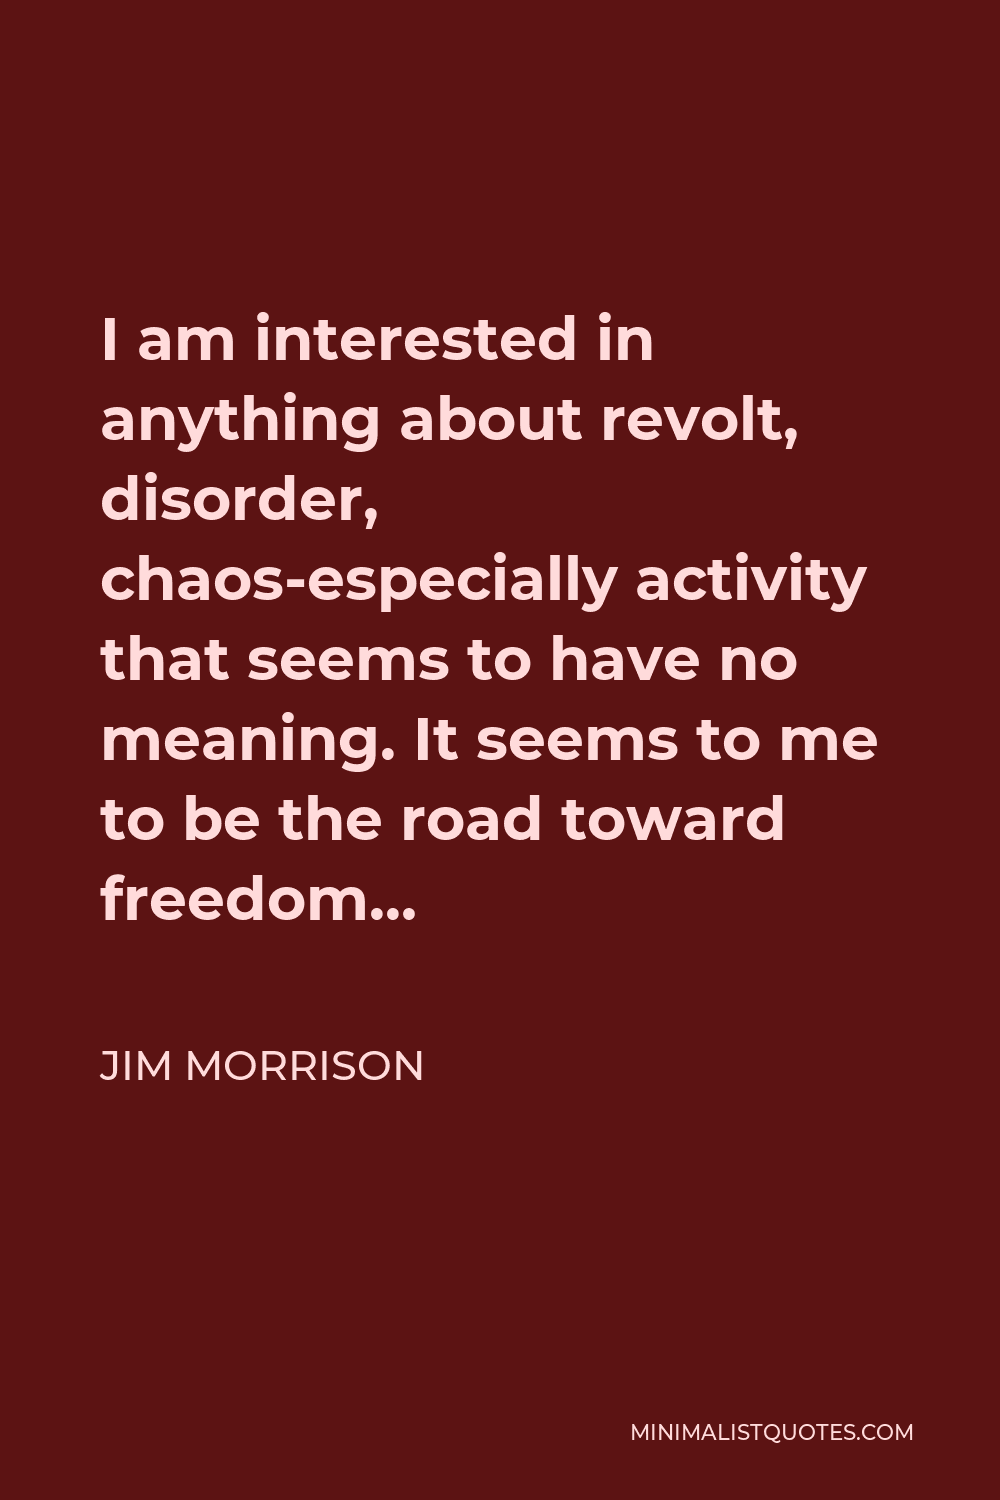 Jim Morrison Quote - I am interested in anything about revolt, disorder, chaos, especially activity that seems to have no meaning.